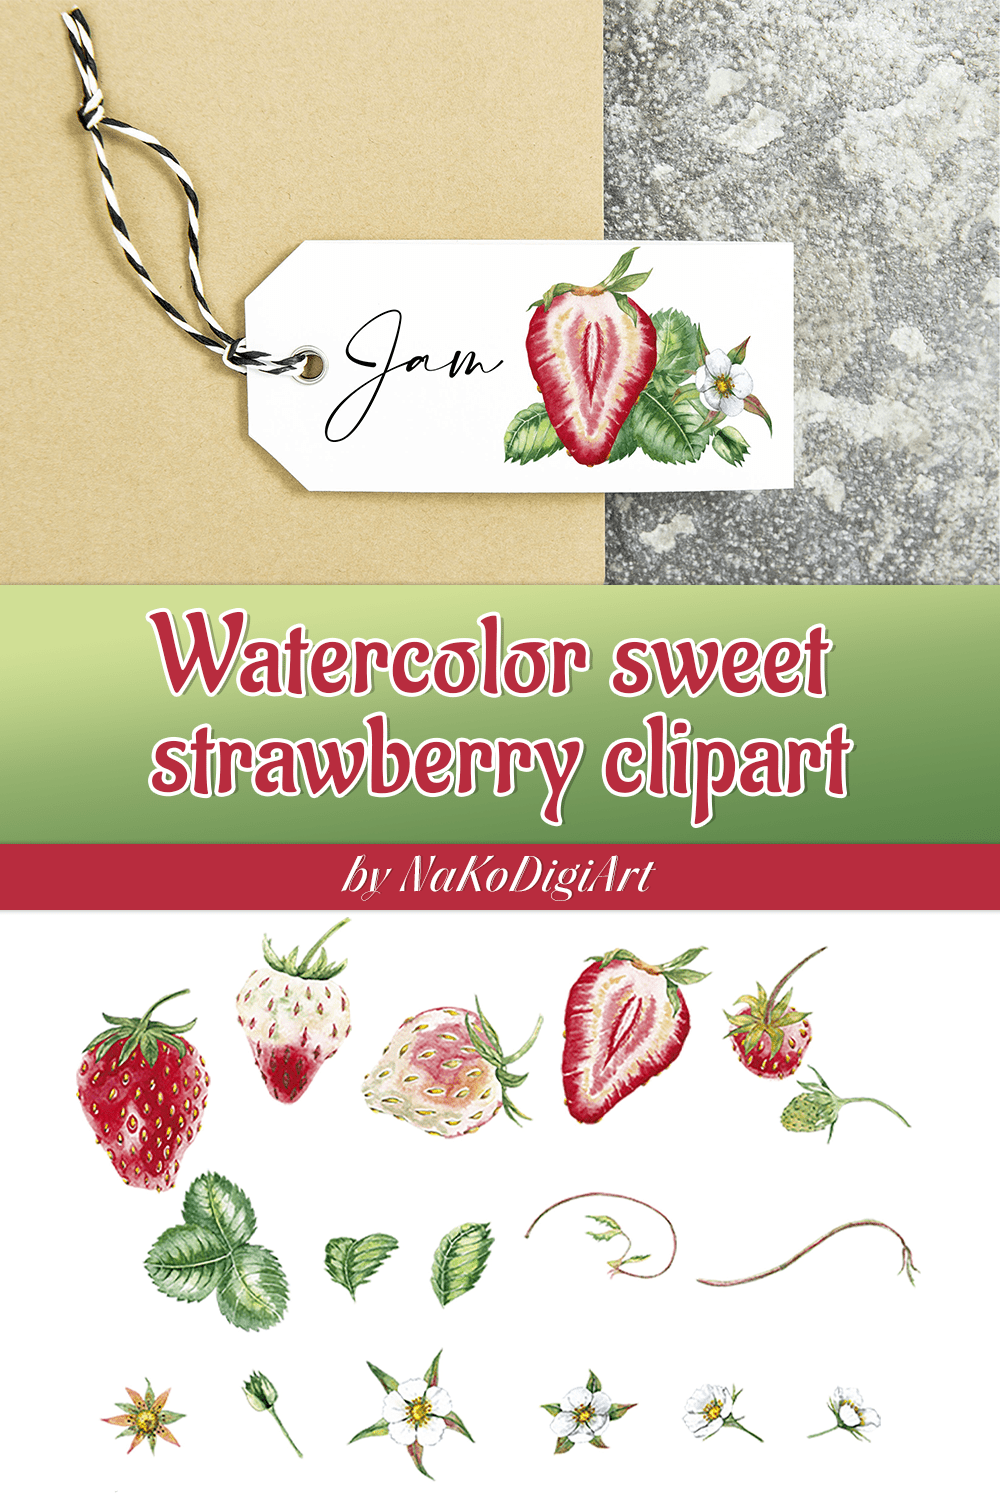 Watercolor Sweet Strawberry Clipart - pinterest image preview.